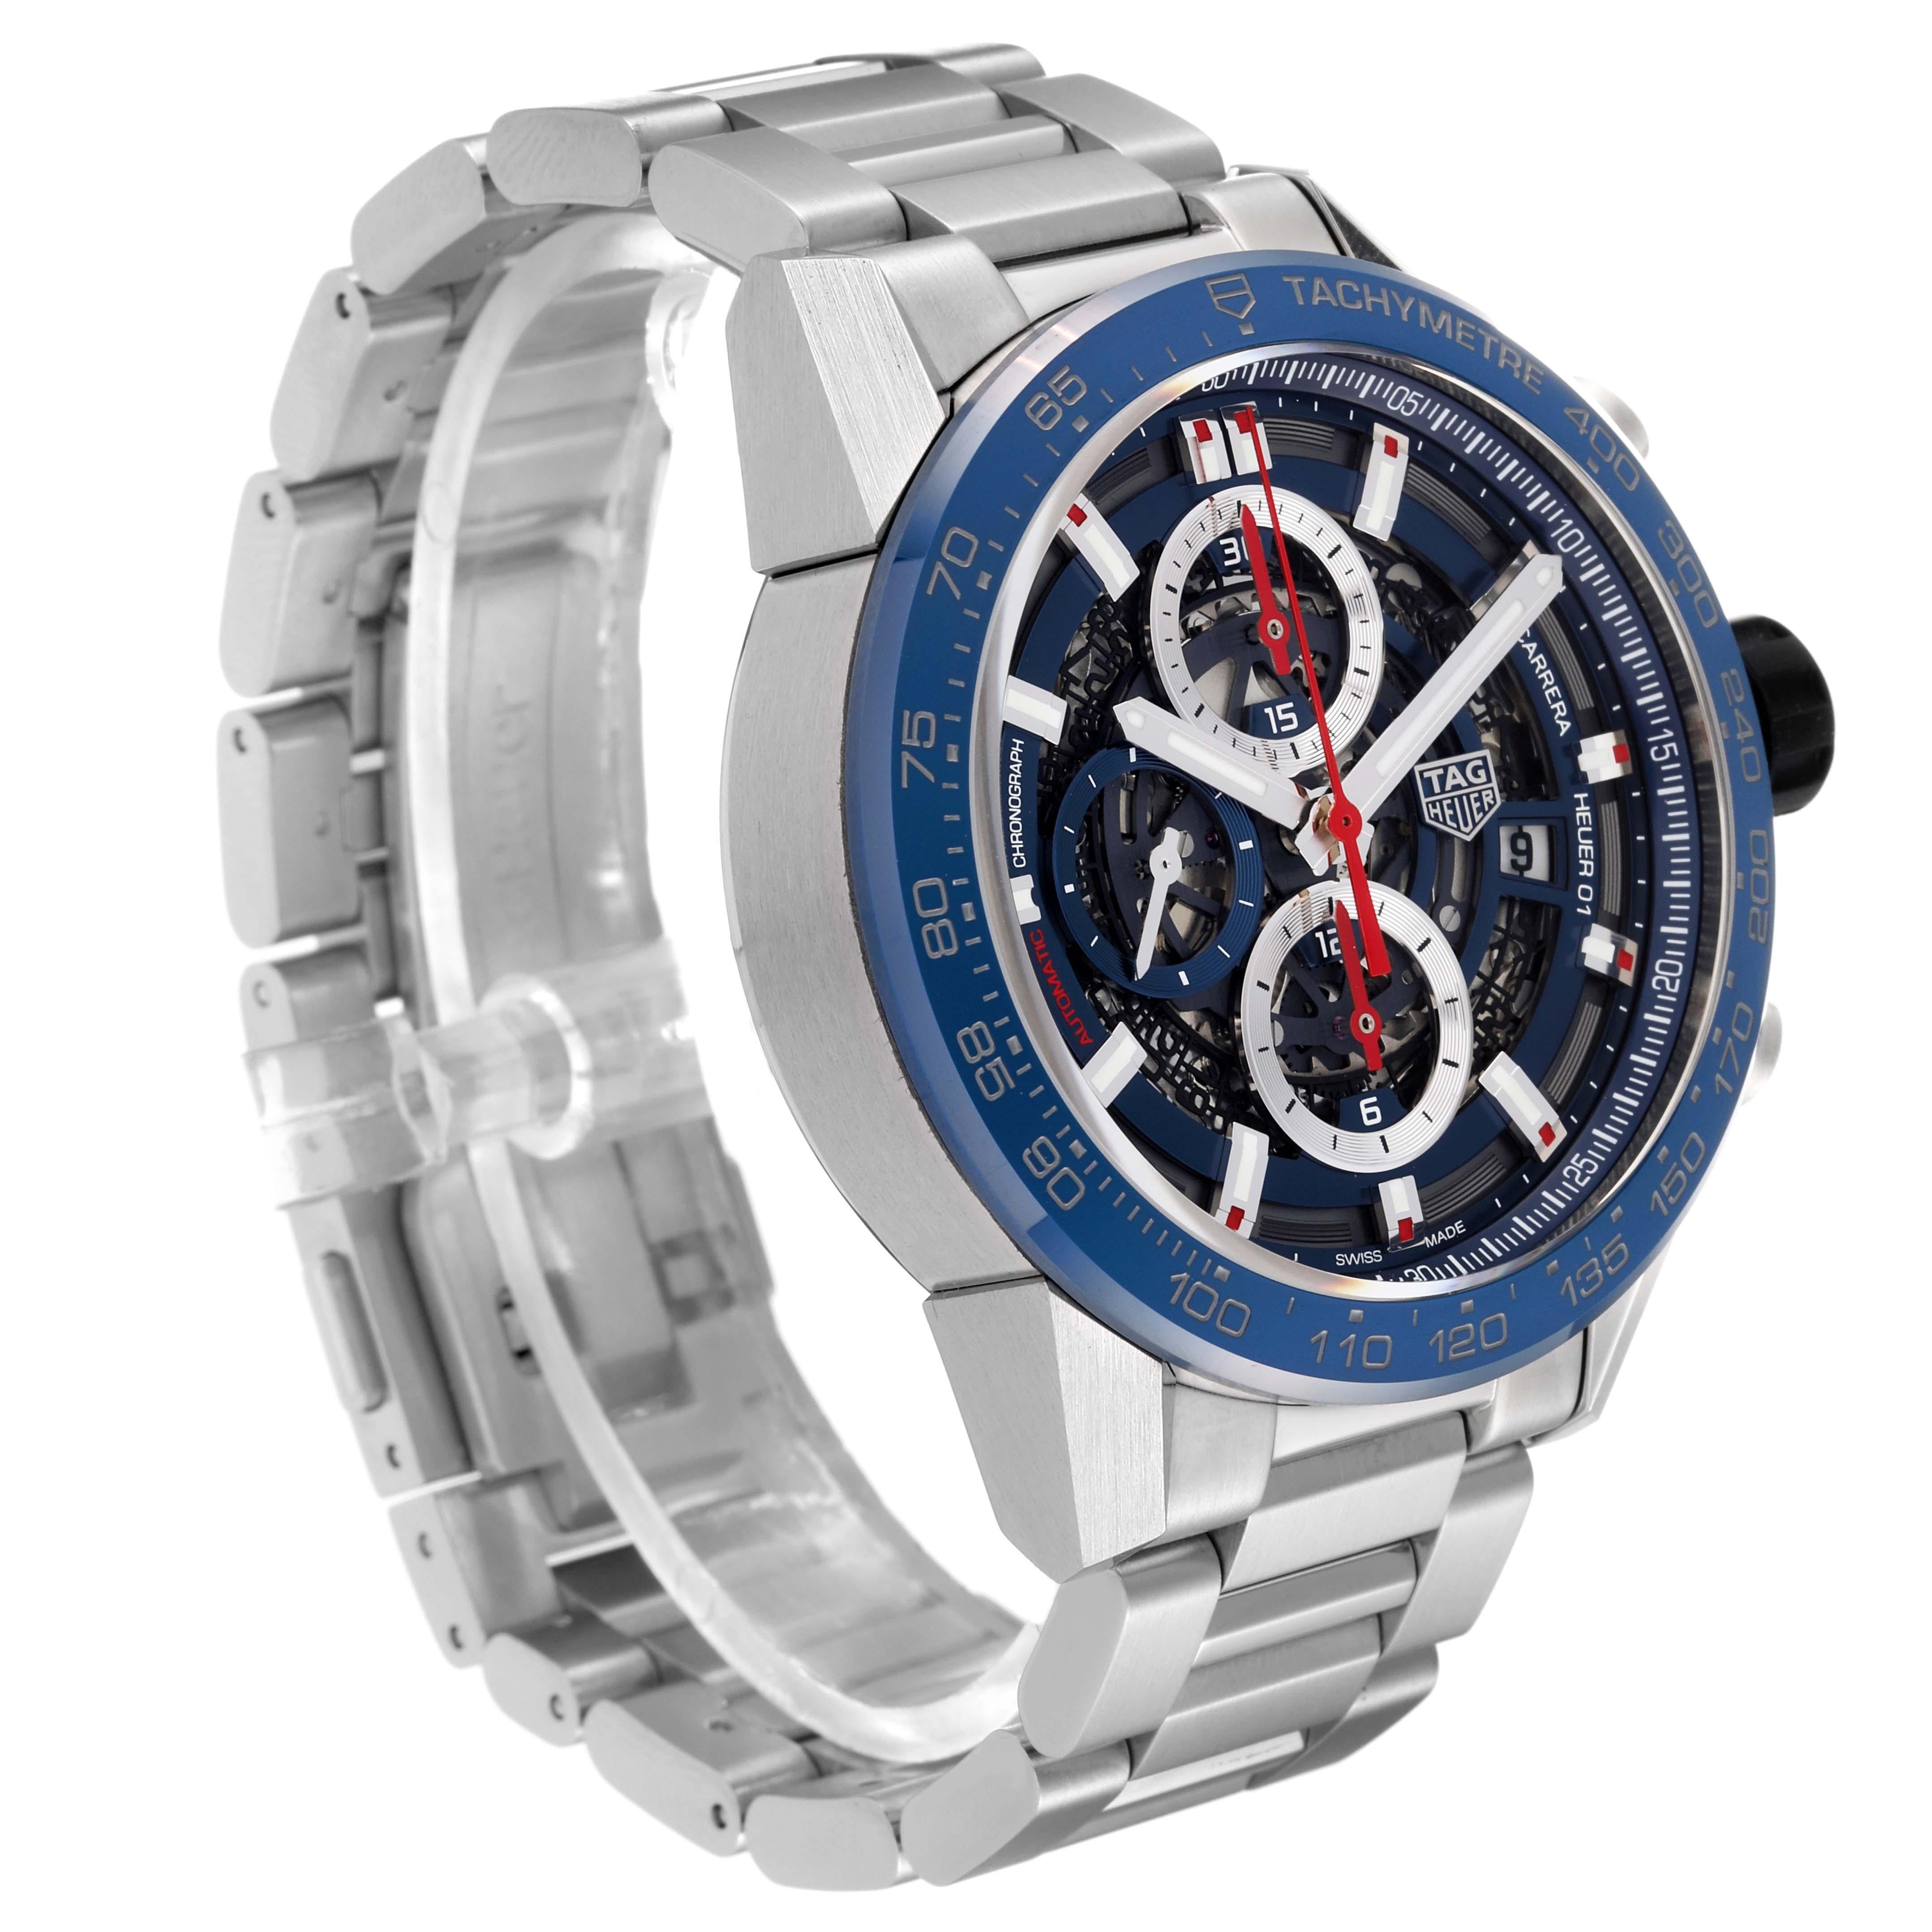 Tag Heuer Carrera Blue Skeleton Dial Chronograph Steel Mens Watch CAR201T In Excellent Condition For Sale In Atlanta, GA